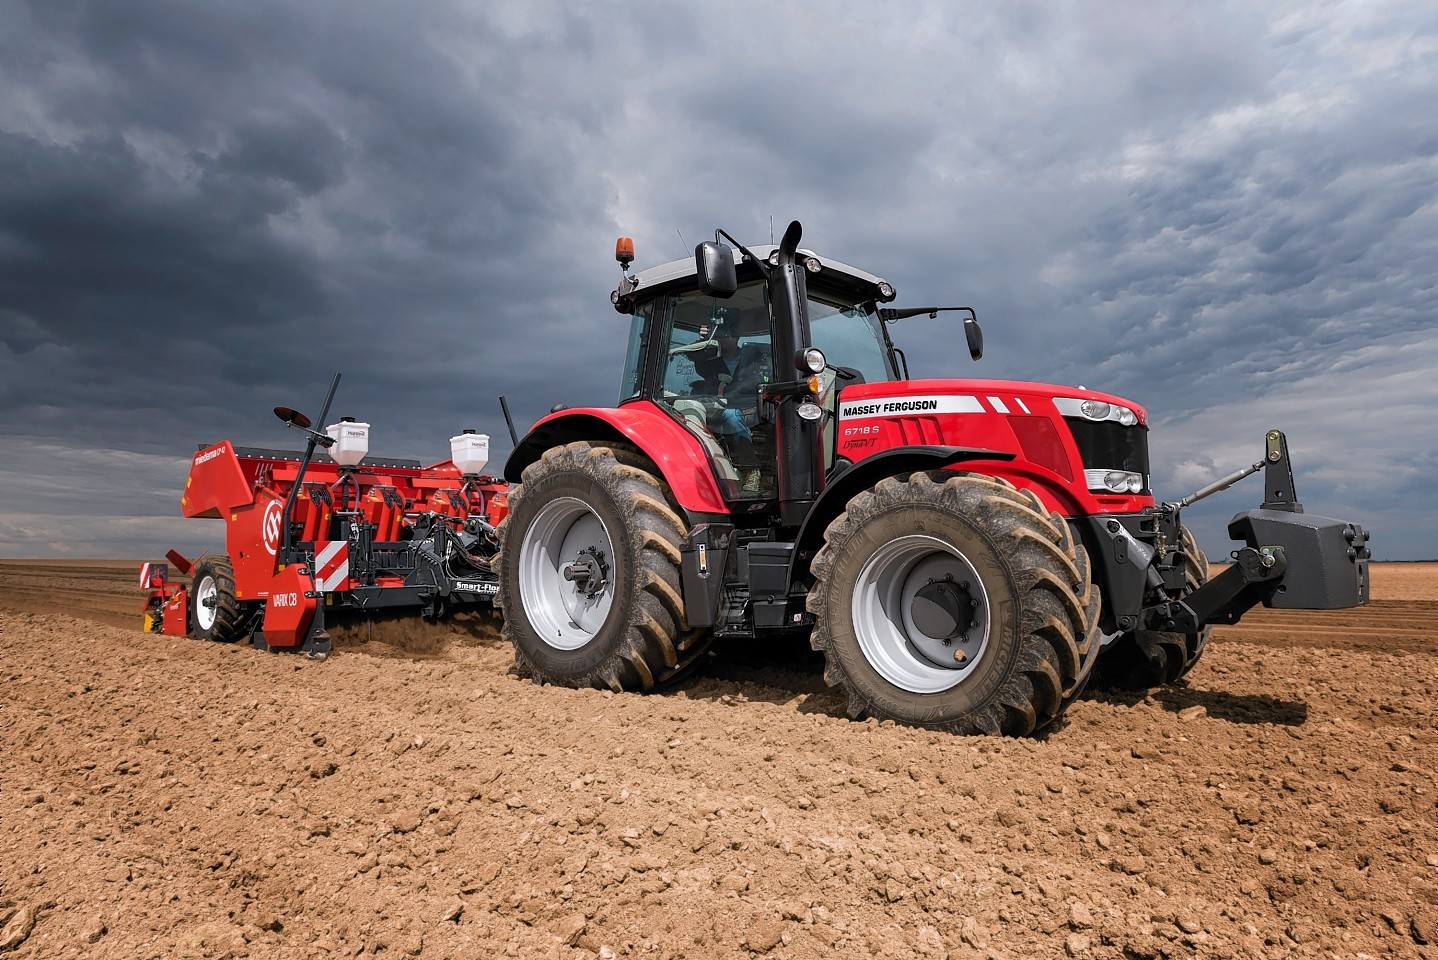 The MF 6718 S has an output of 200hp maximum and is the largest tractor in the range.